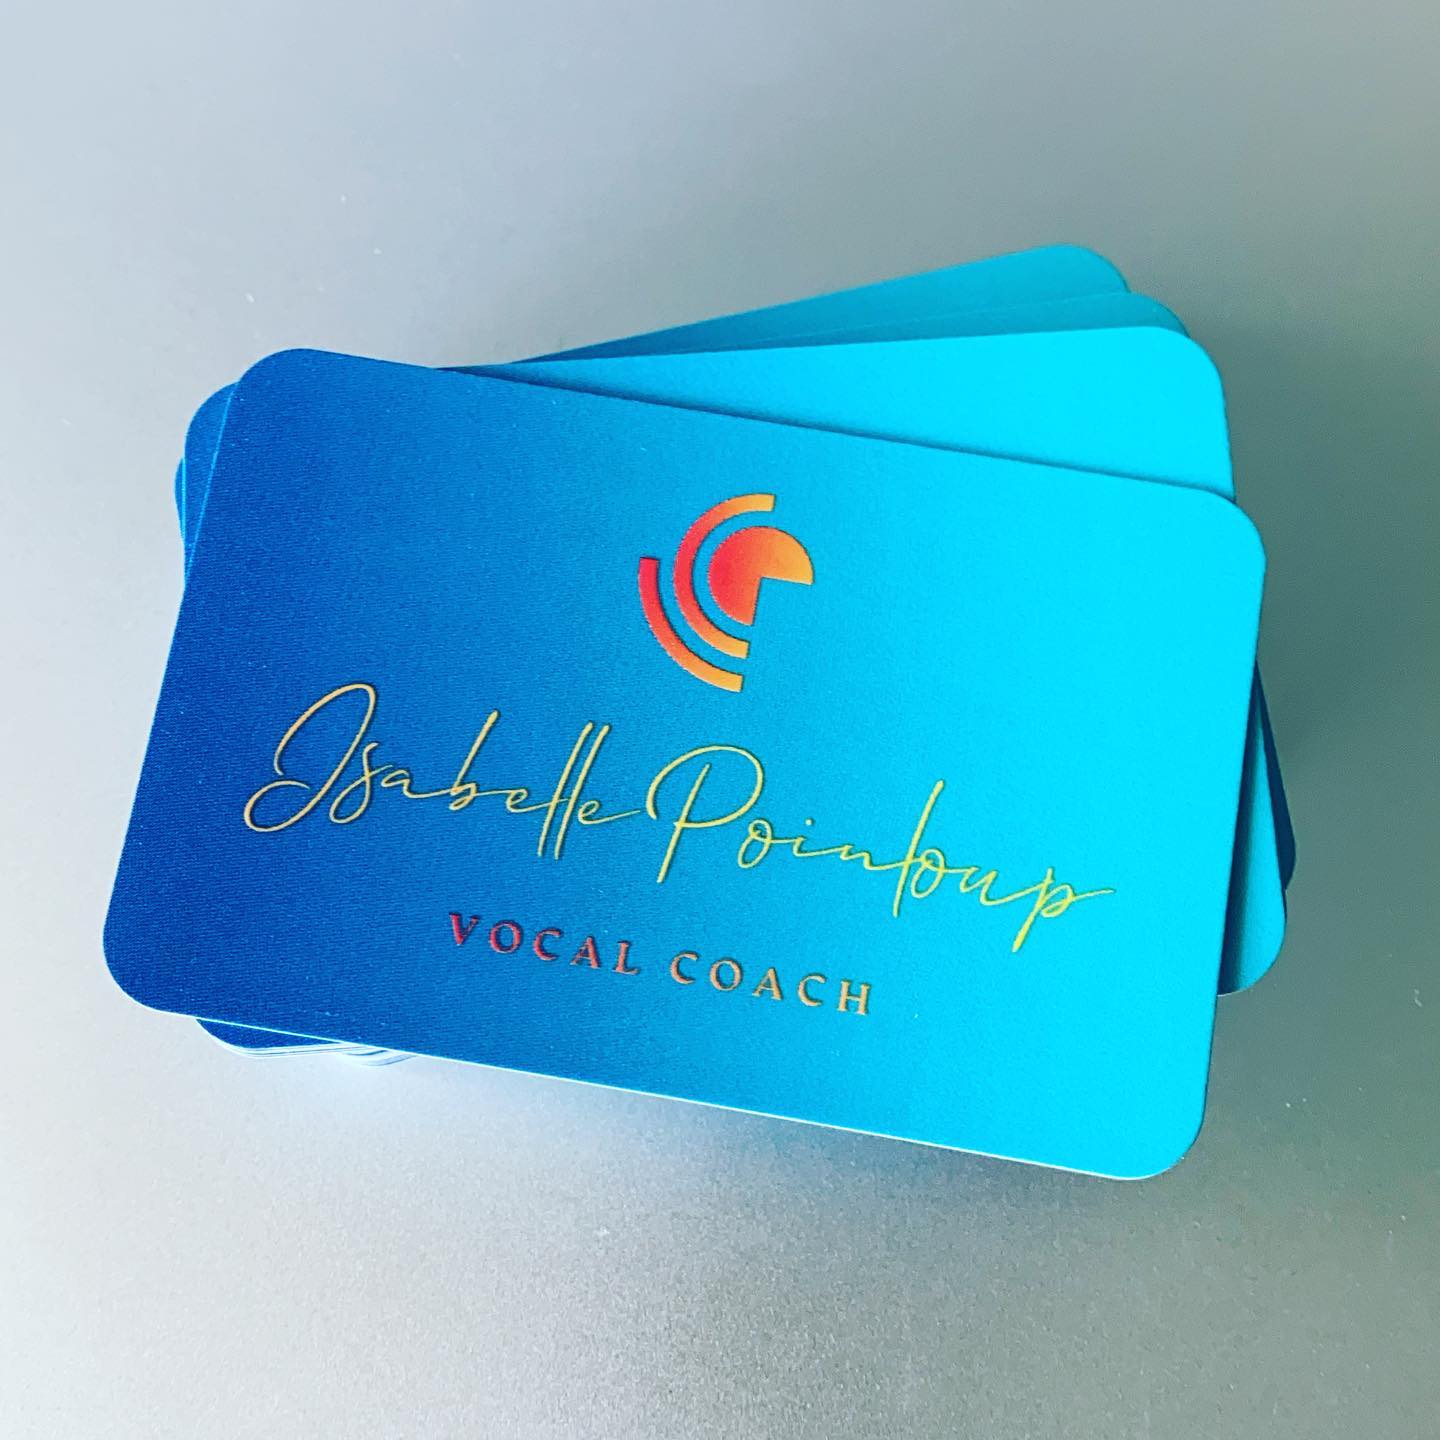 Business cards just arrived and they are gorgeous!
#madewithvistaprint